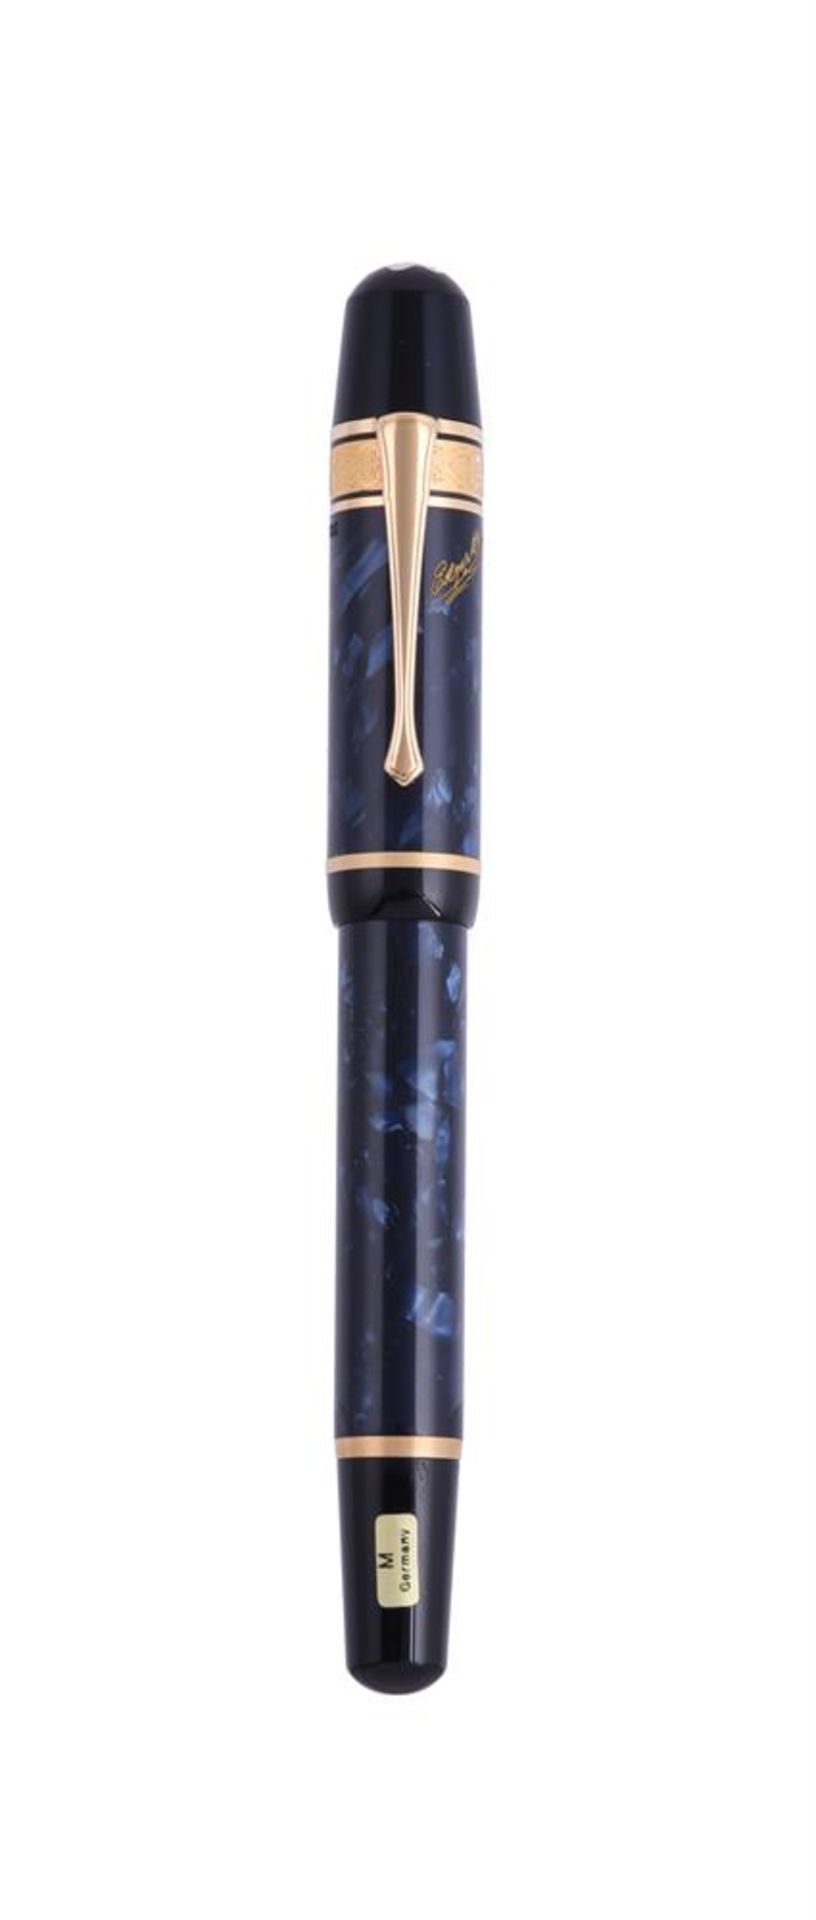 MONTBLANC, WRITERS EDITION, EDGAR ALLAN POE, A LIMITED EDITION FOUNTAIN PEN